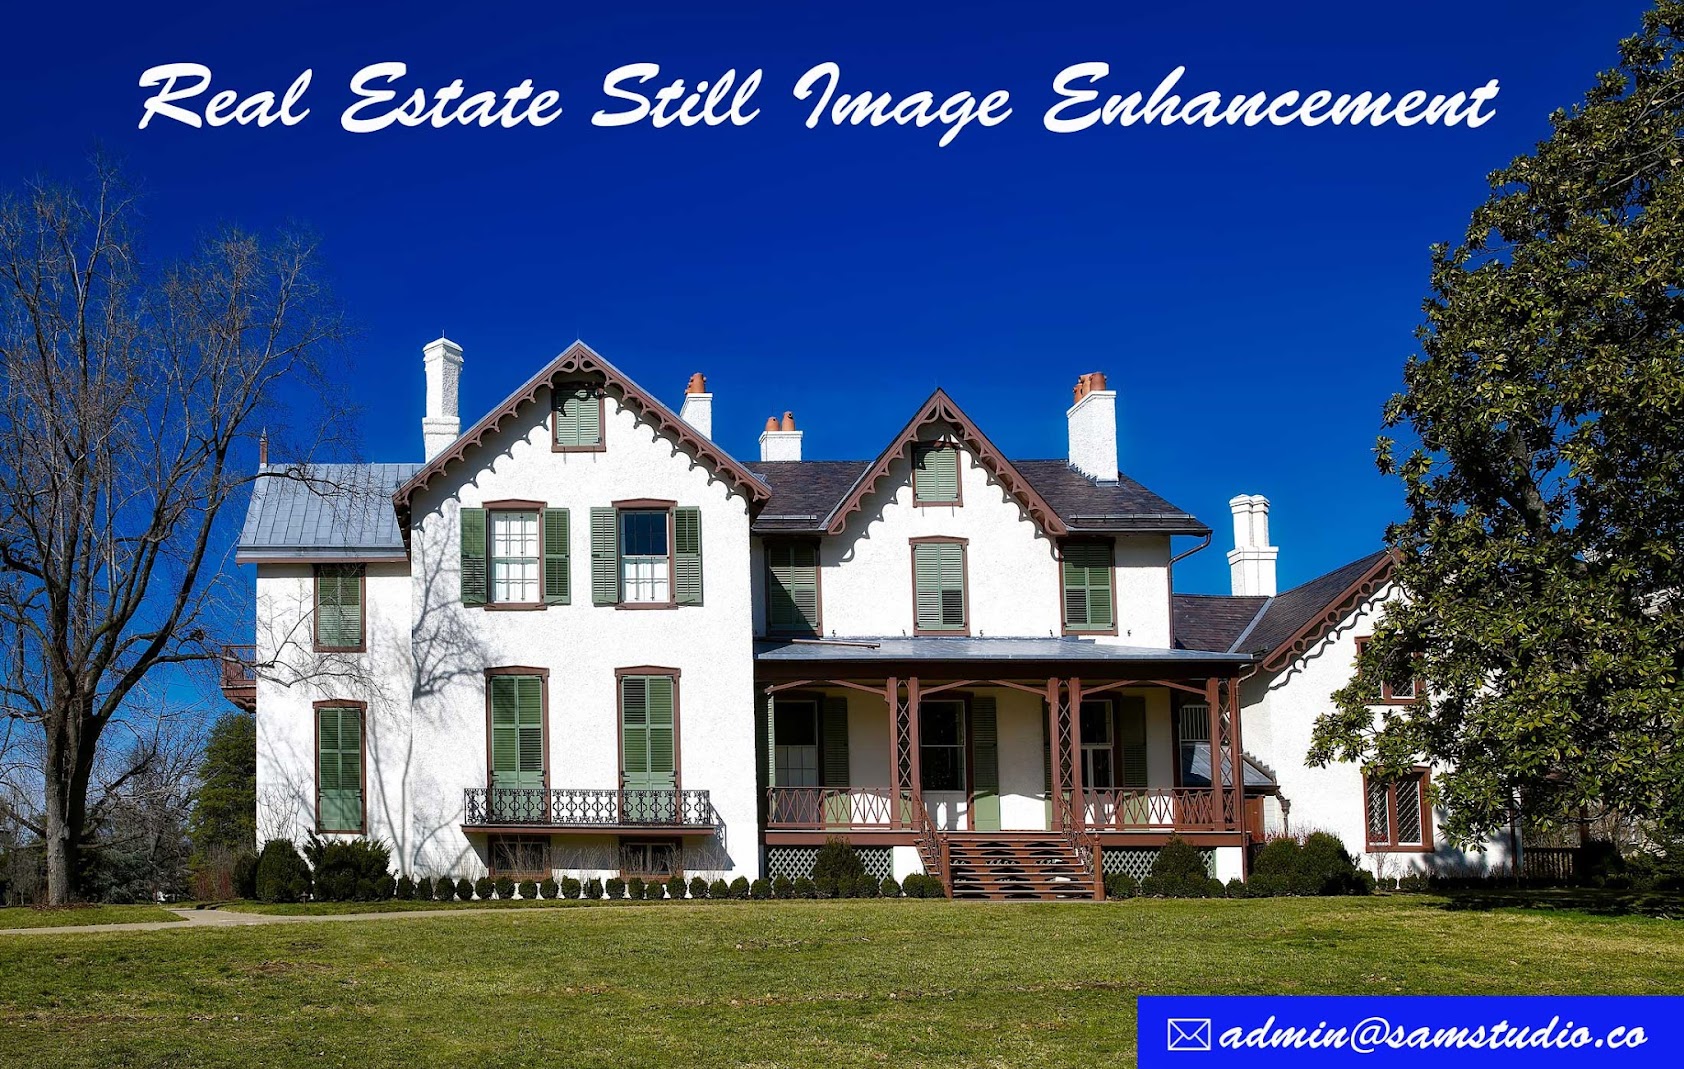 Real Estate Image Editing Services